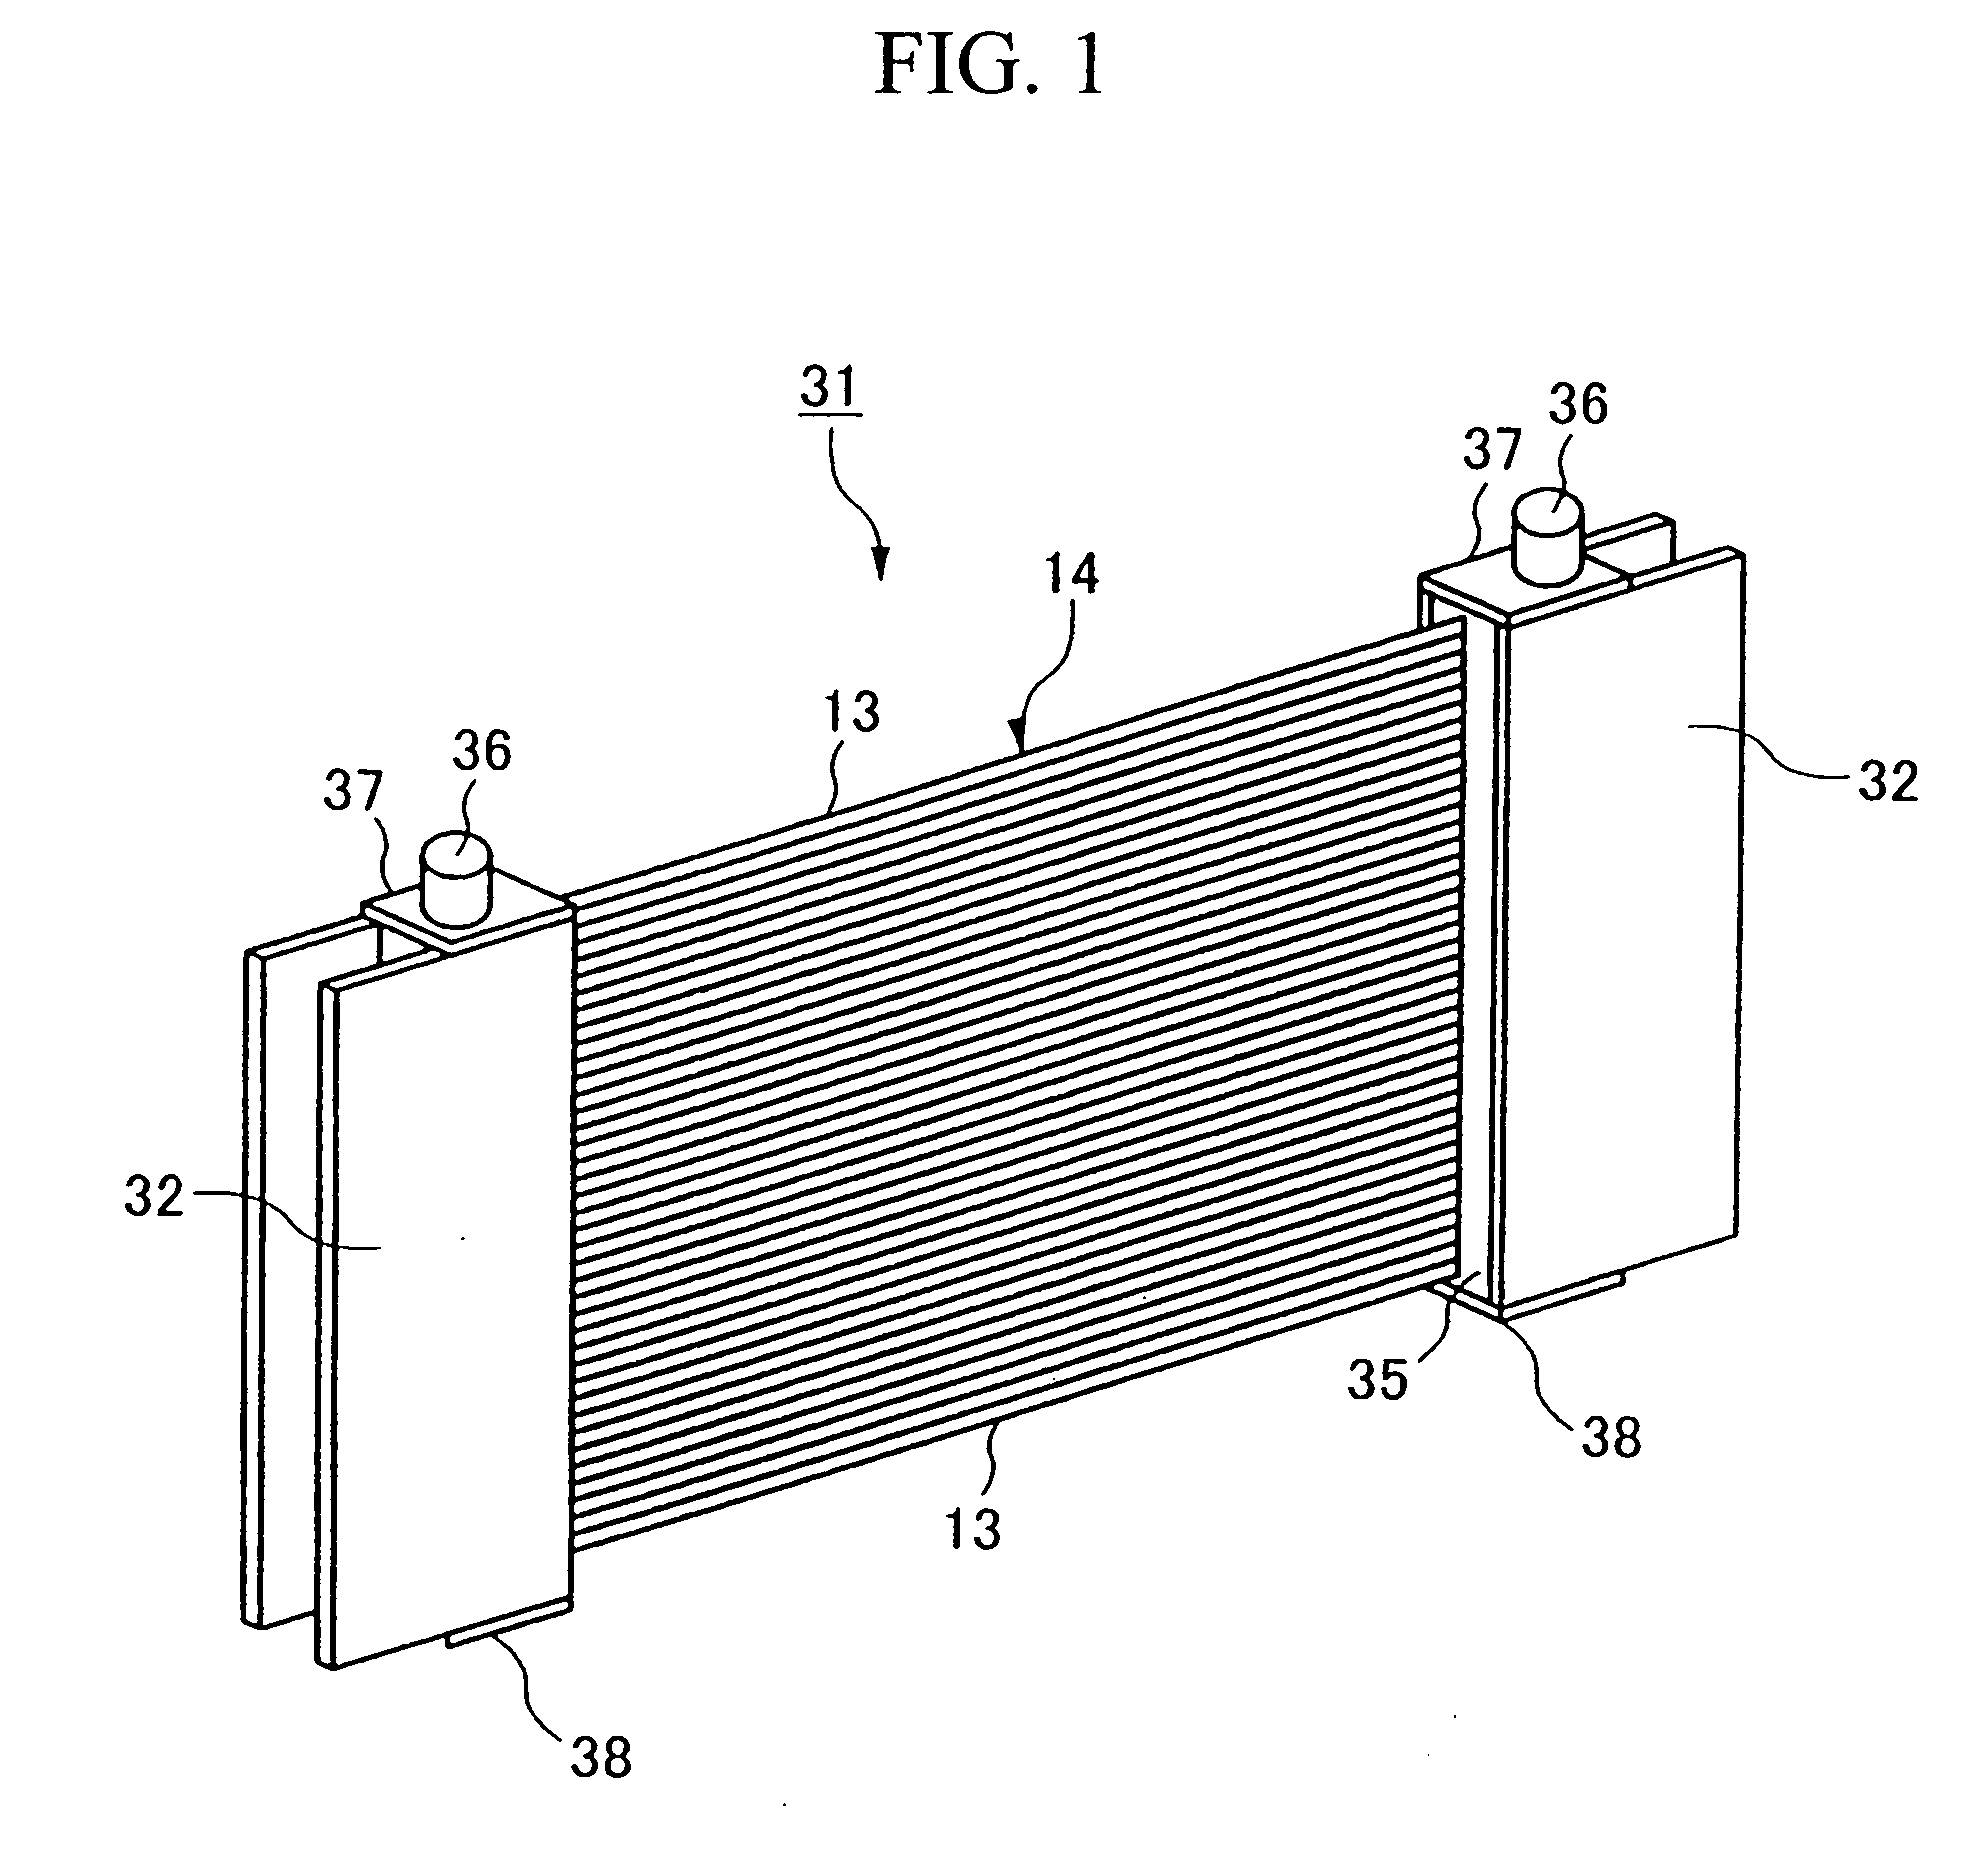 Hollow fiber membrane module, and a manufacturing method therefor, and housing for hollow fiber memberane module